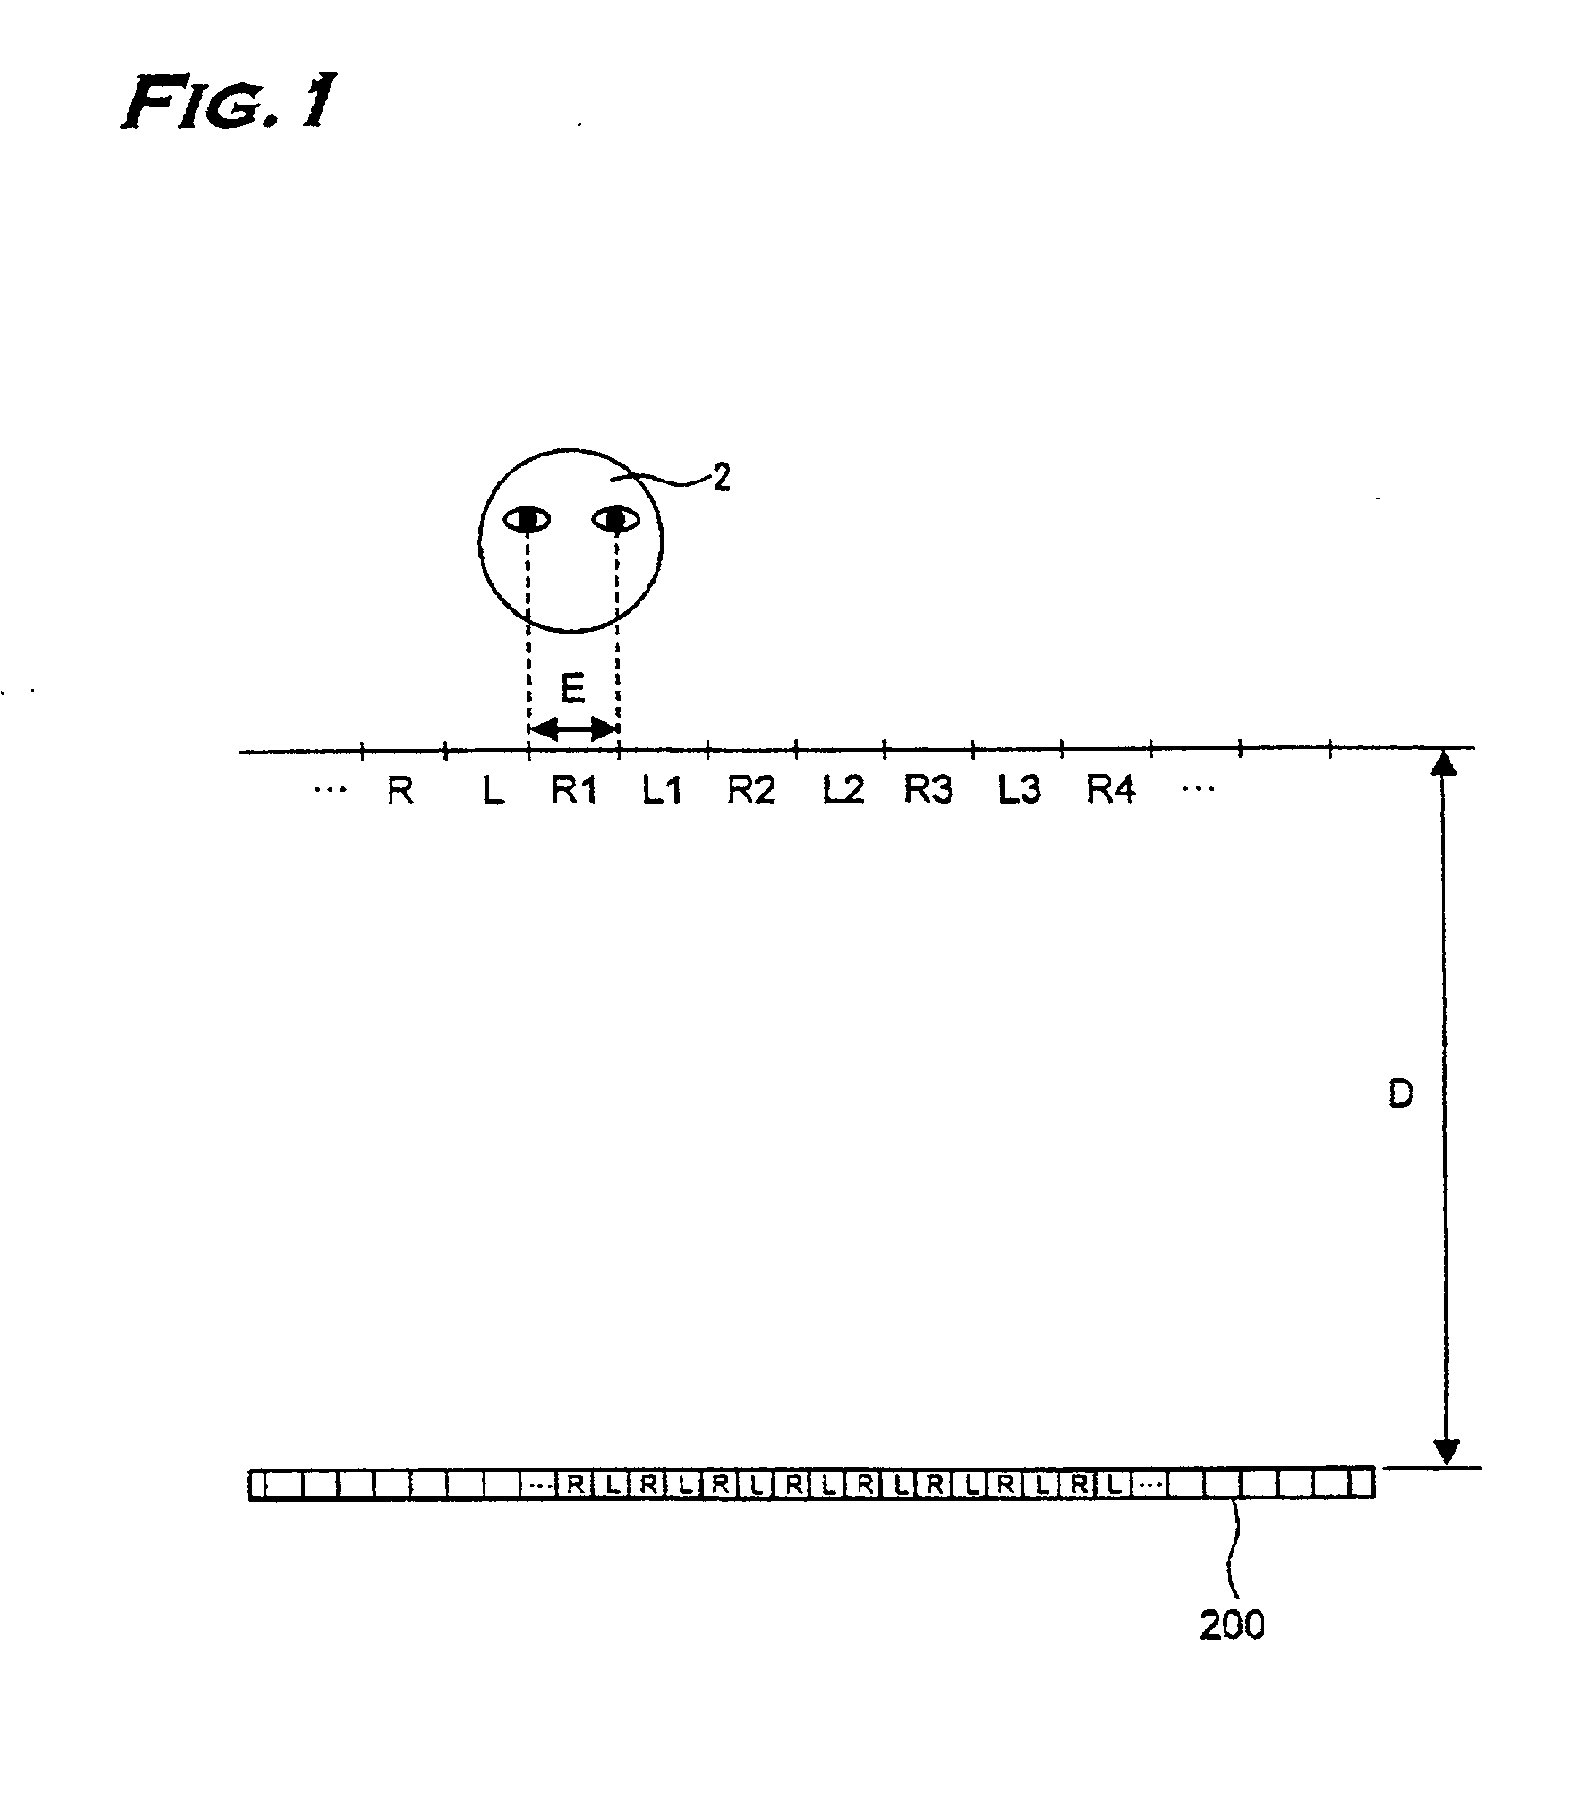 Stereoscopic image display device without glasses